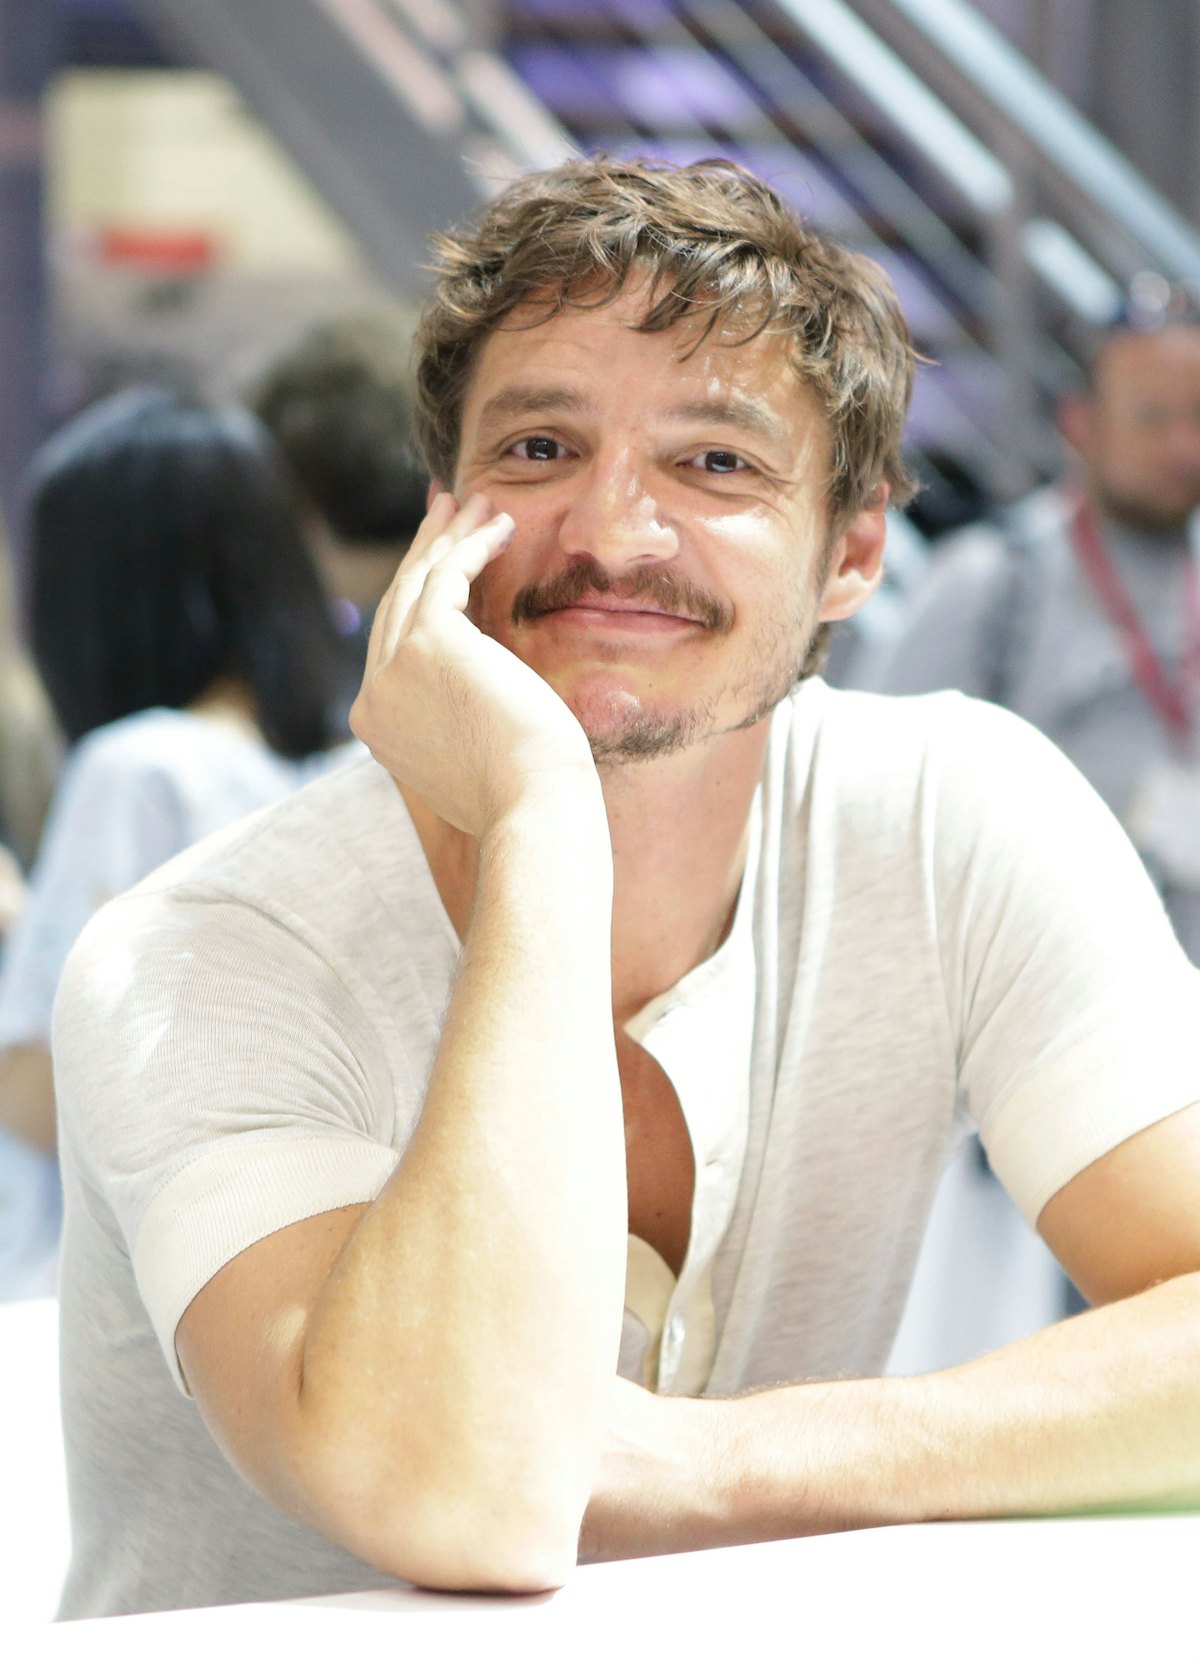 SAN DIEGO, CA - JULY 25:  Actor Pedro Pascal of "Game of Thrones" signs autographs during the 2014 C...